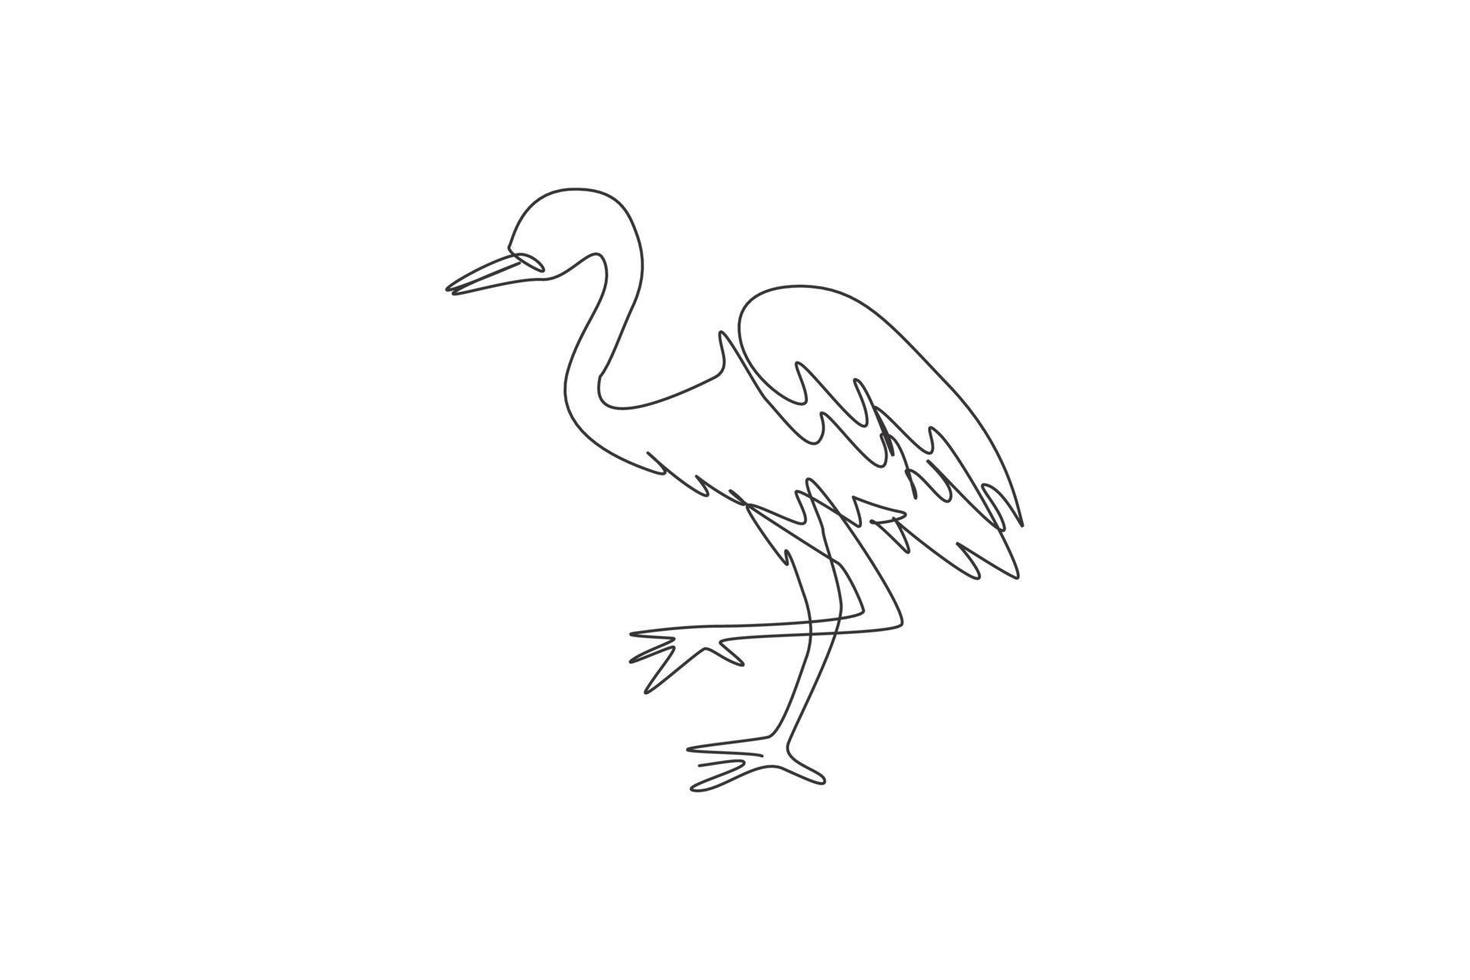 One single line drawing of cute heron bird vector illustration. Protected species national park conservation. Safari zoo concept. Modern continuous line graphic draw design